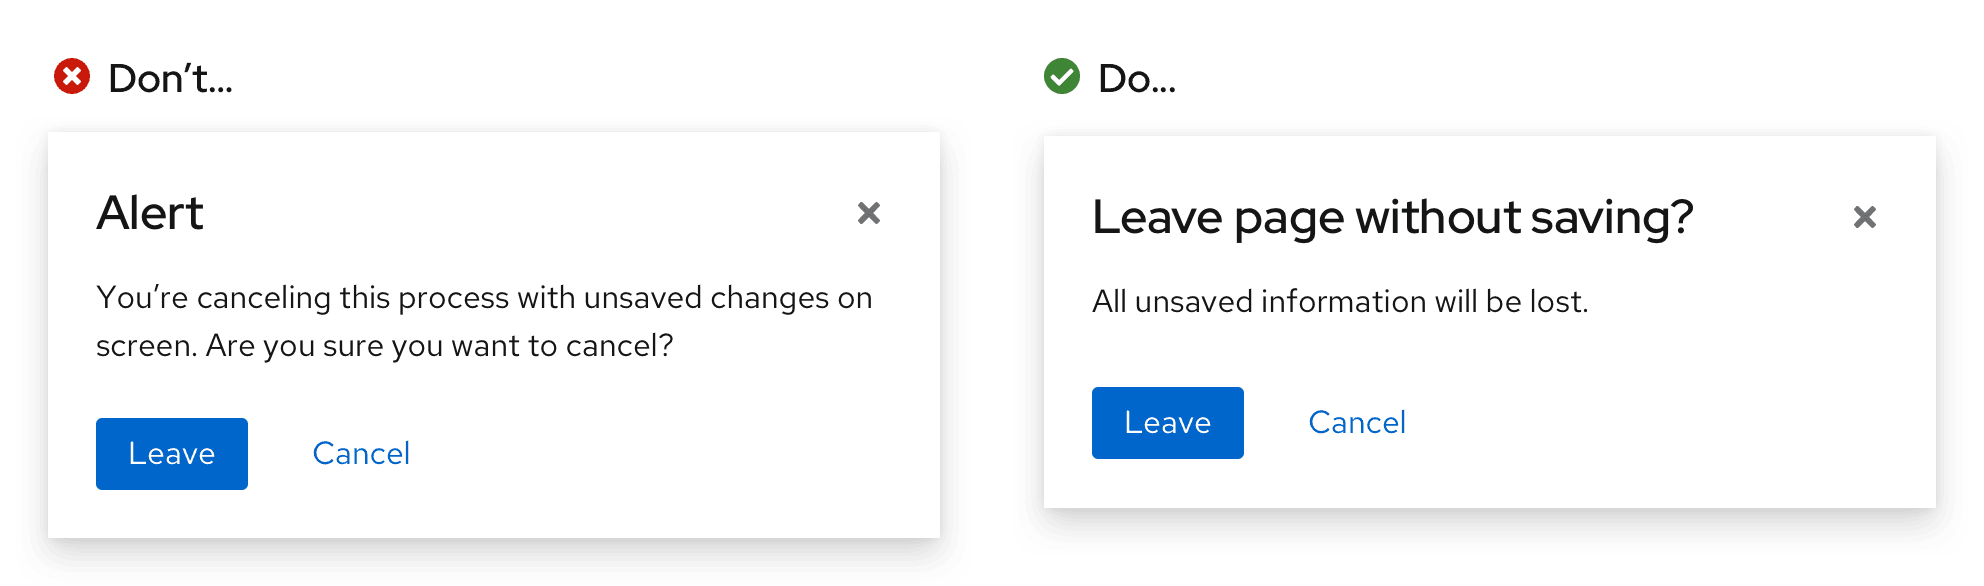 A side-by-side comparison of unsuccessful and successful confirmaton dialogs for leaving a page without saving. The successful dialog explains the consequence of this action: All unsaved informaton will be lost